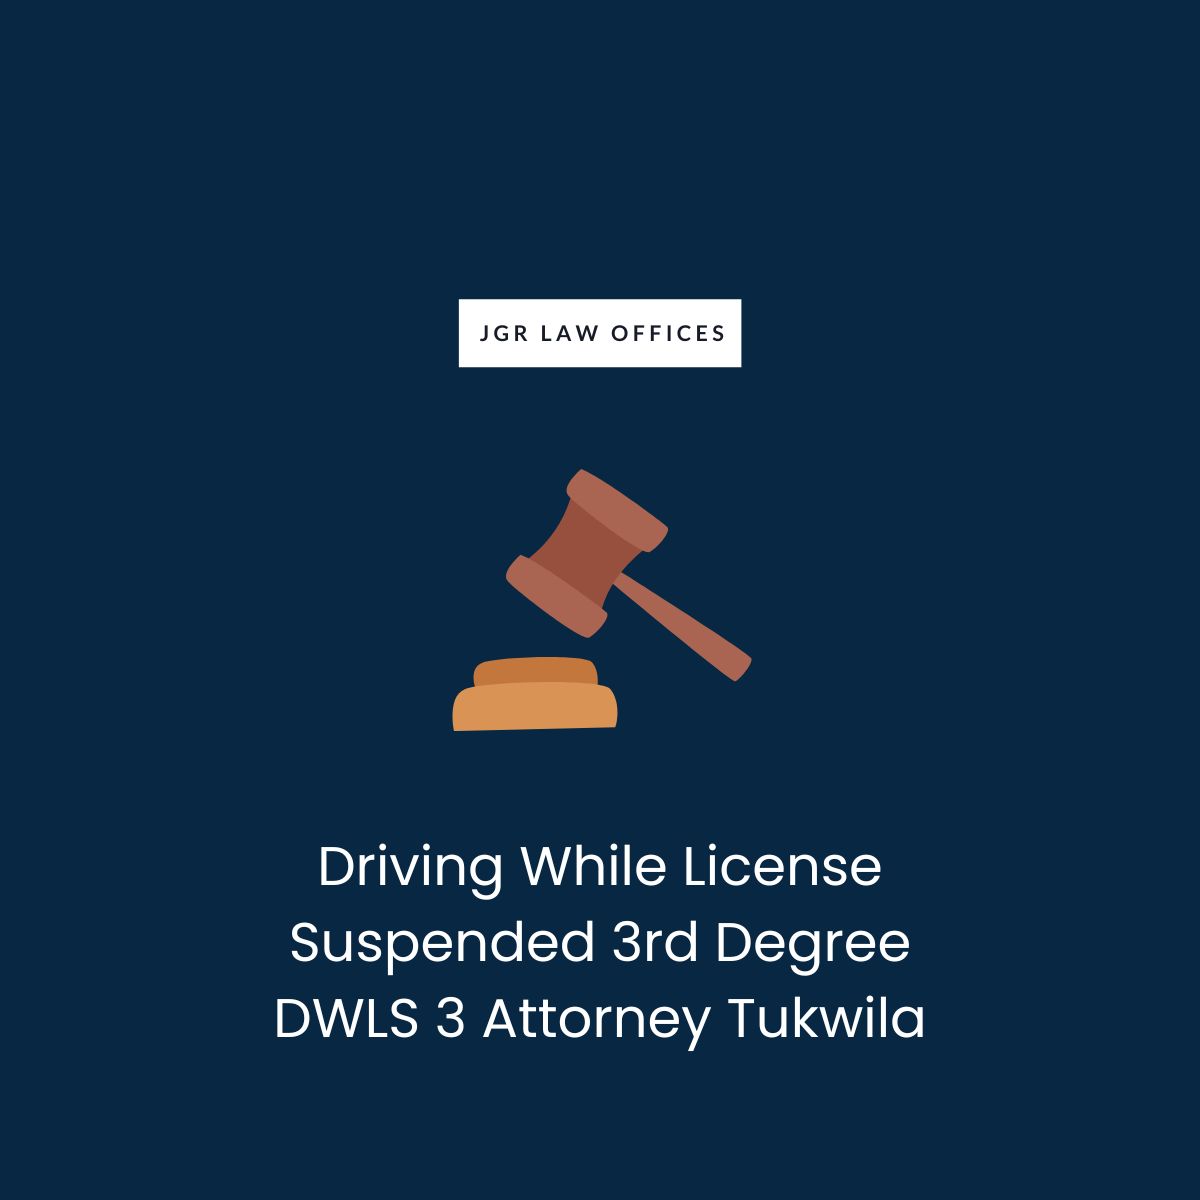 Driving While License Suspended 3rd Degree DWLS 3 Attorney Tukwila